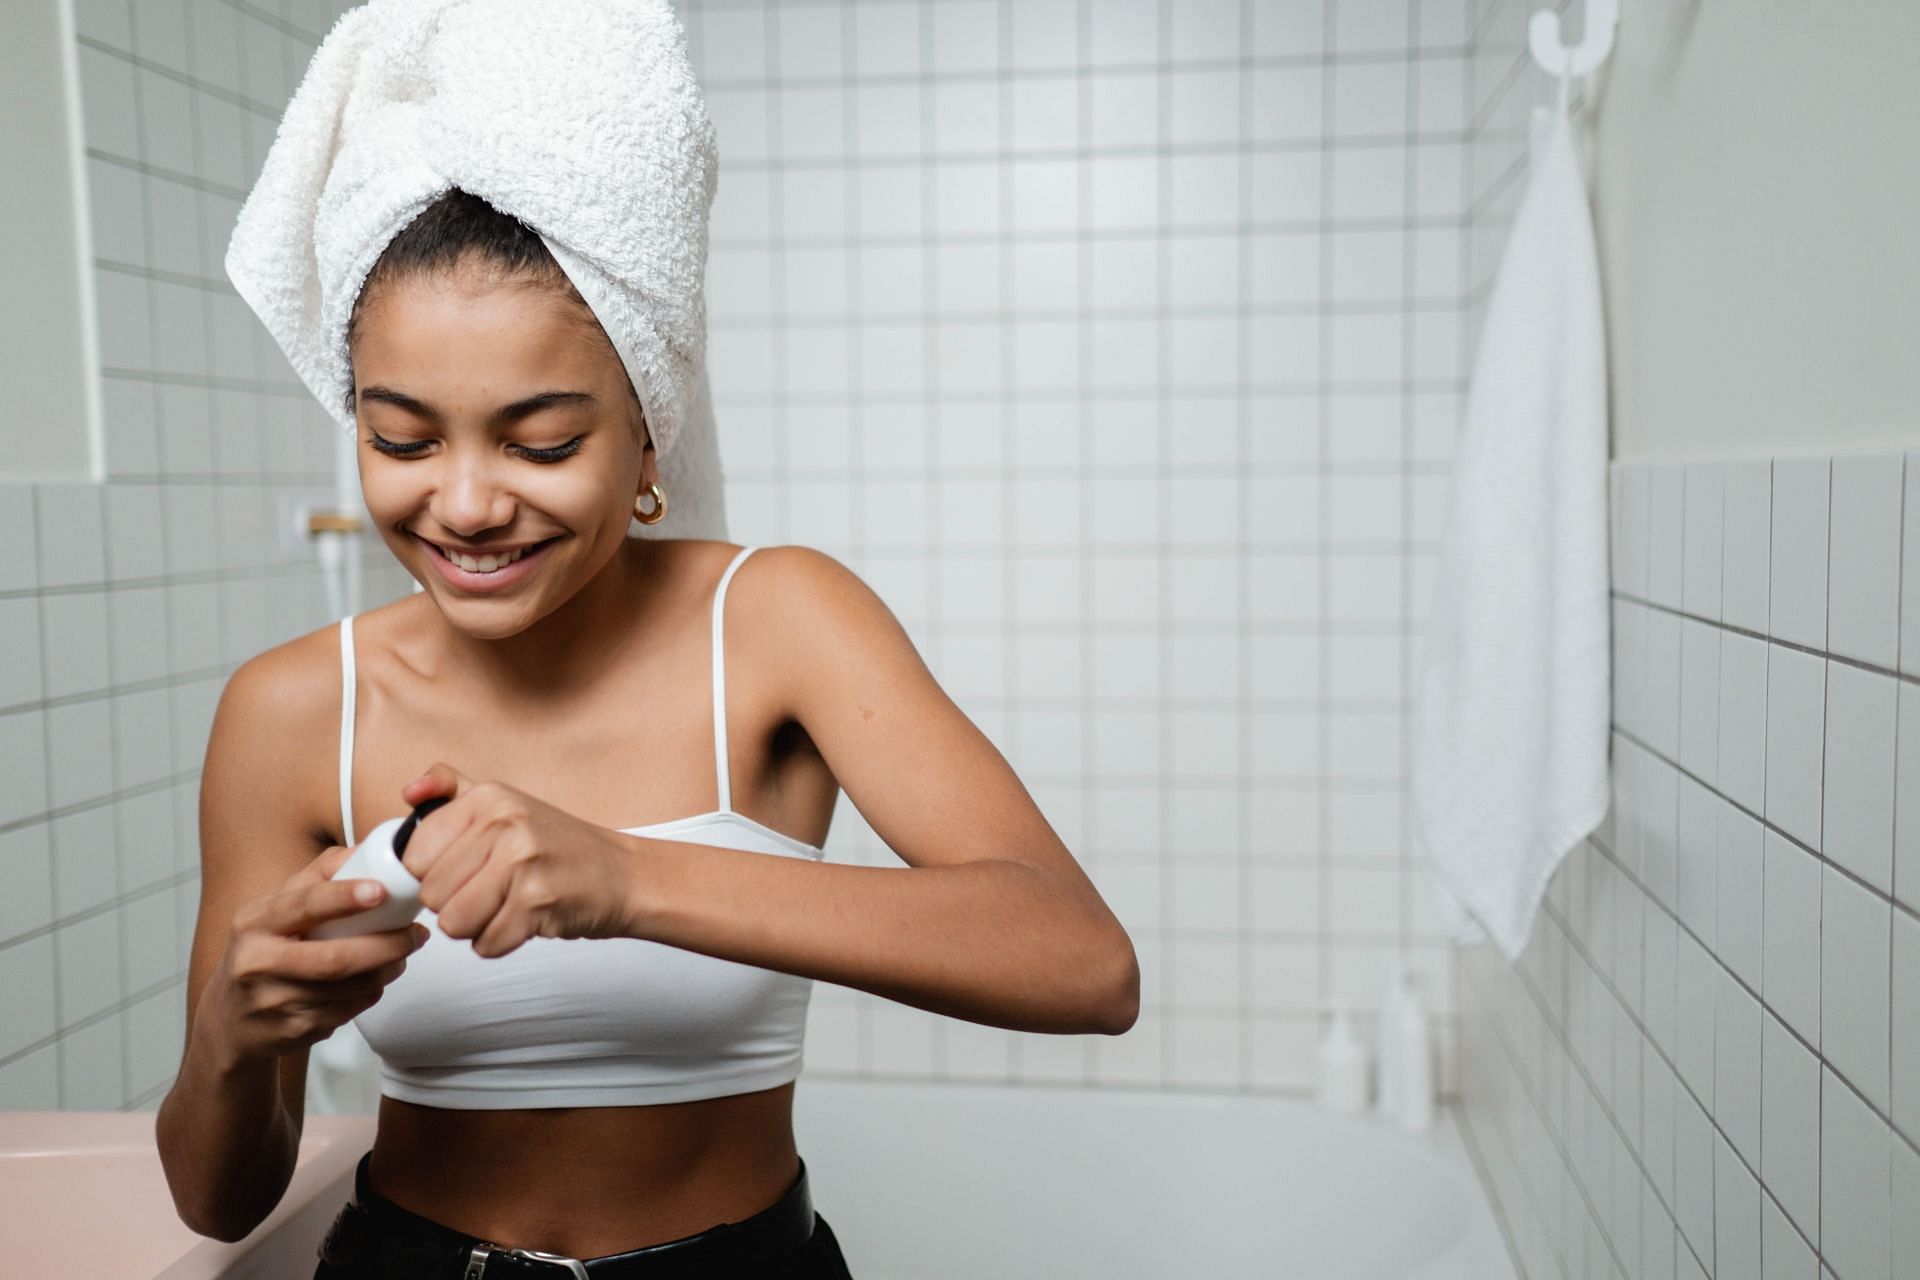 Guide to Personal Hygiene (Image via Pexels / Ron Lach)